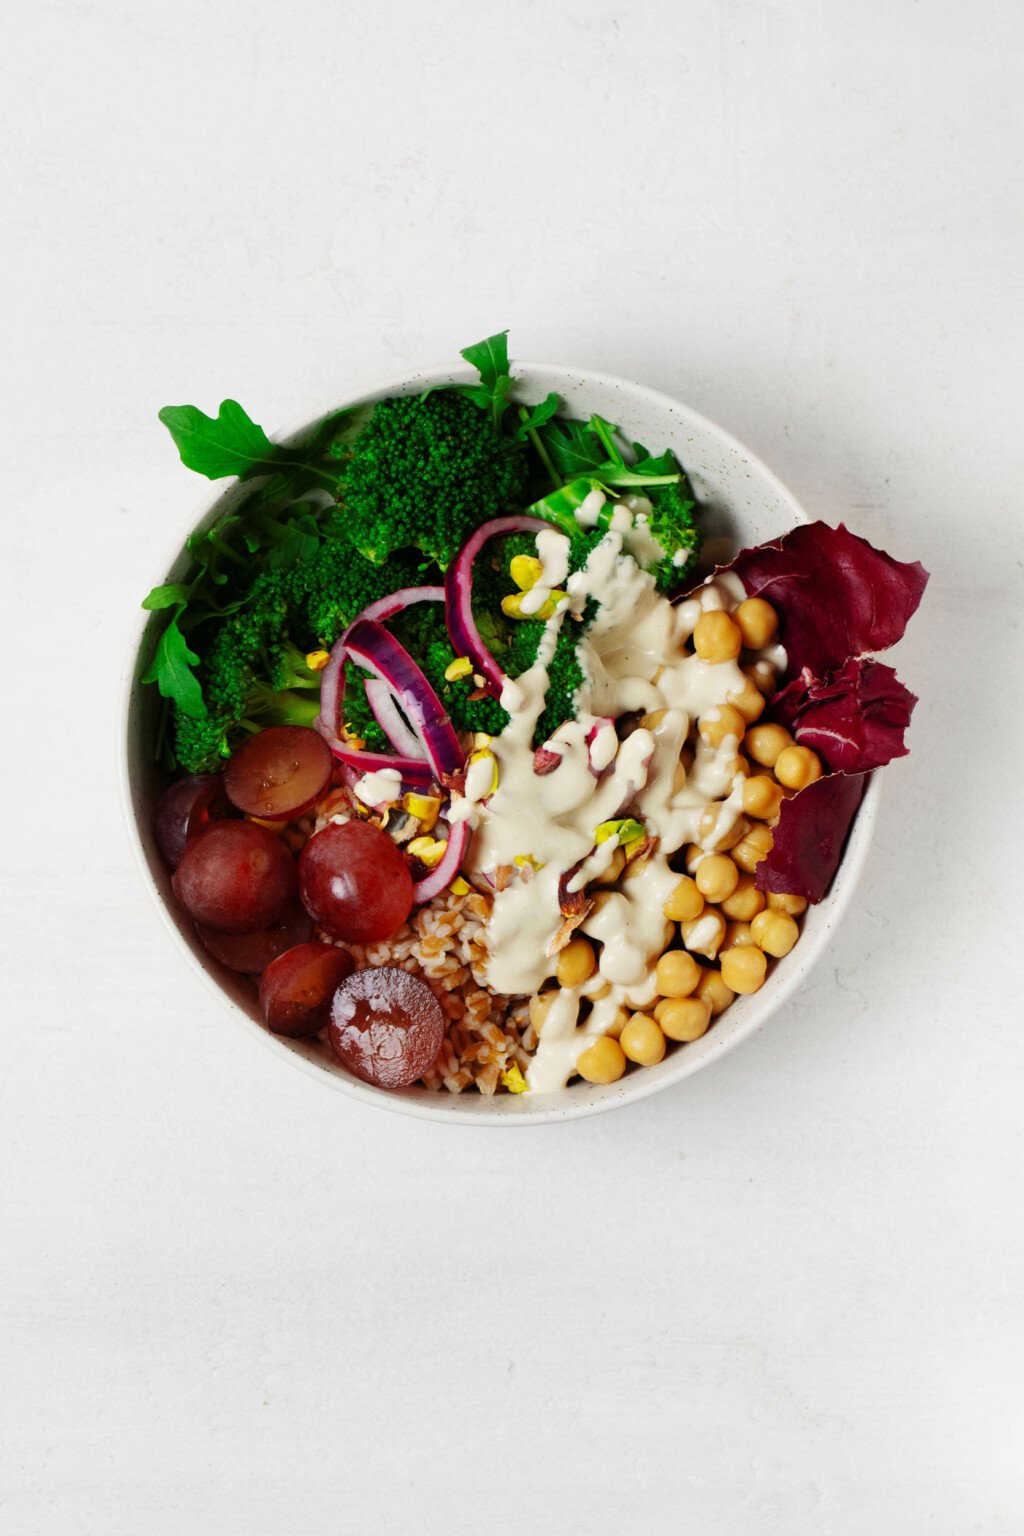 Overhead image of a white, round ceramic dish containing ingredients for a vegan farro bowl.  It's topped with tahini dressing and chopped, shelled pistachios.